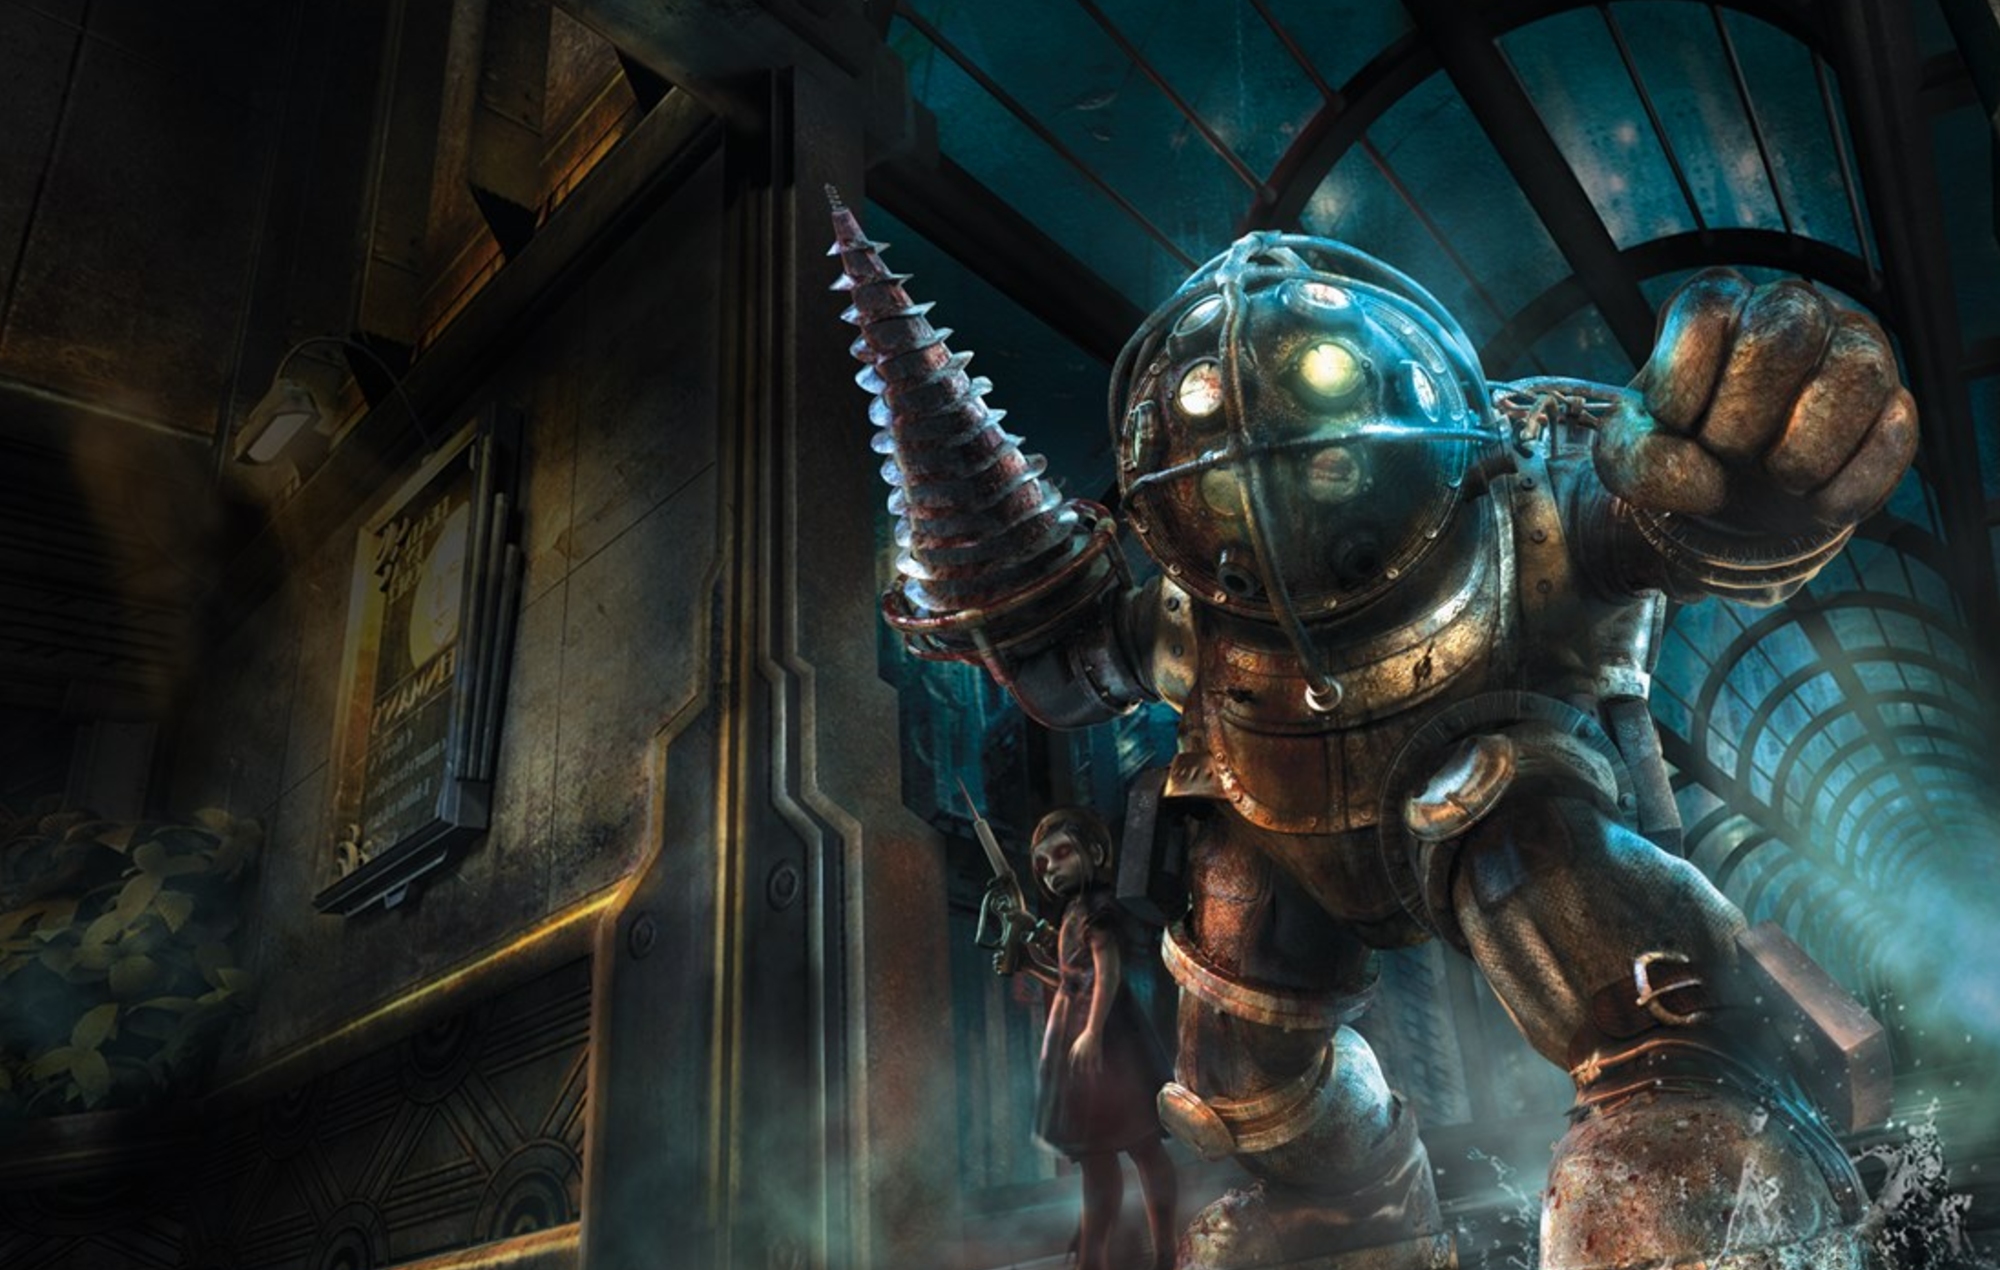 Apocalyptic Games versus reality - The Real “Bioshock”